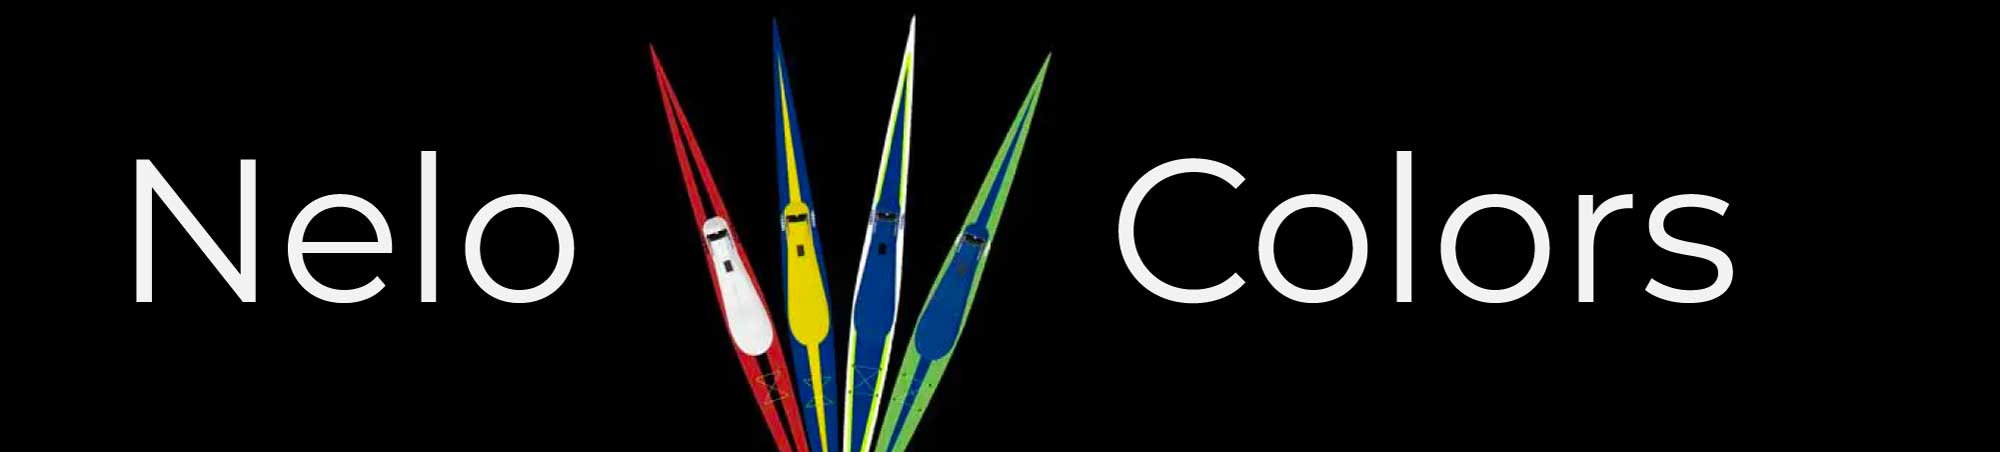 Nelo Boat Colors for new surfskis and K1's